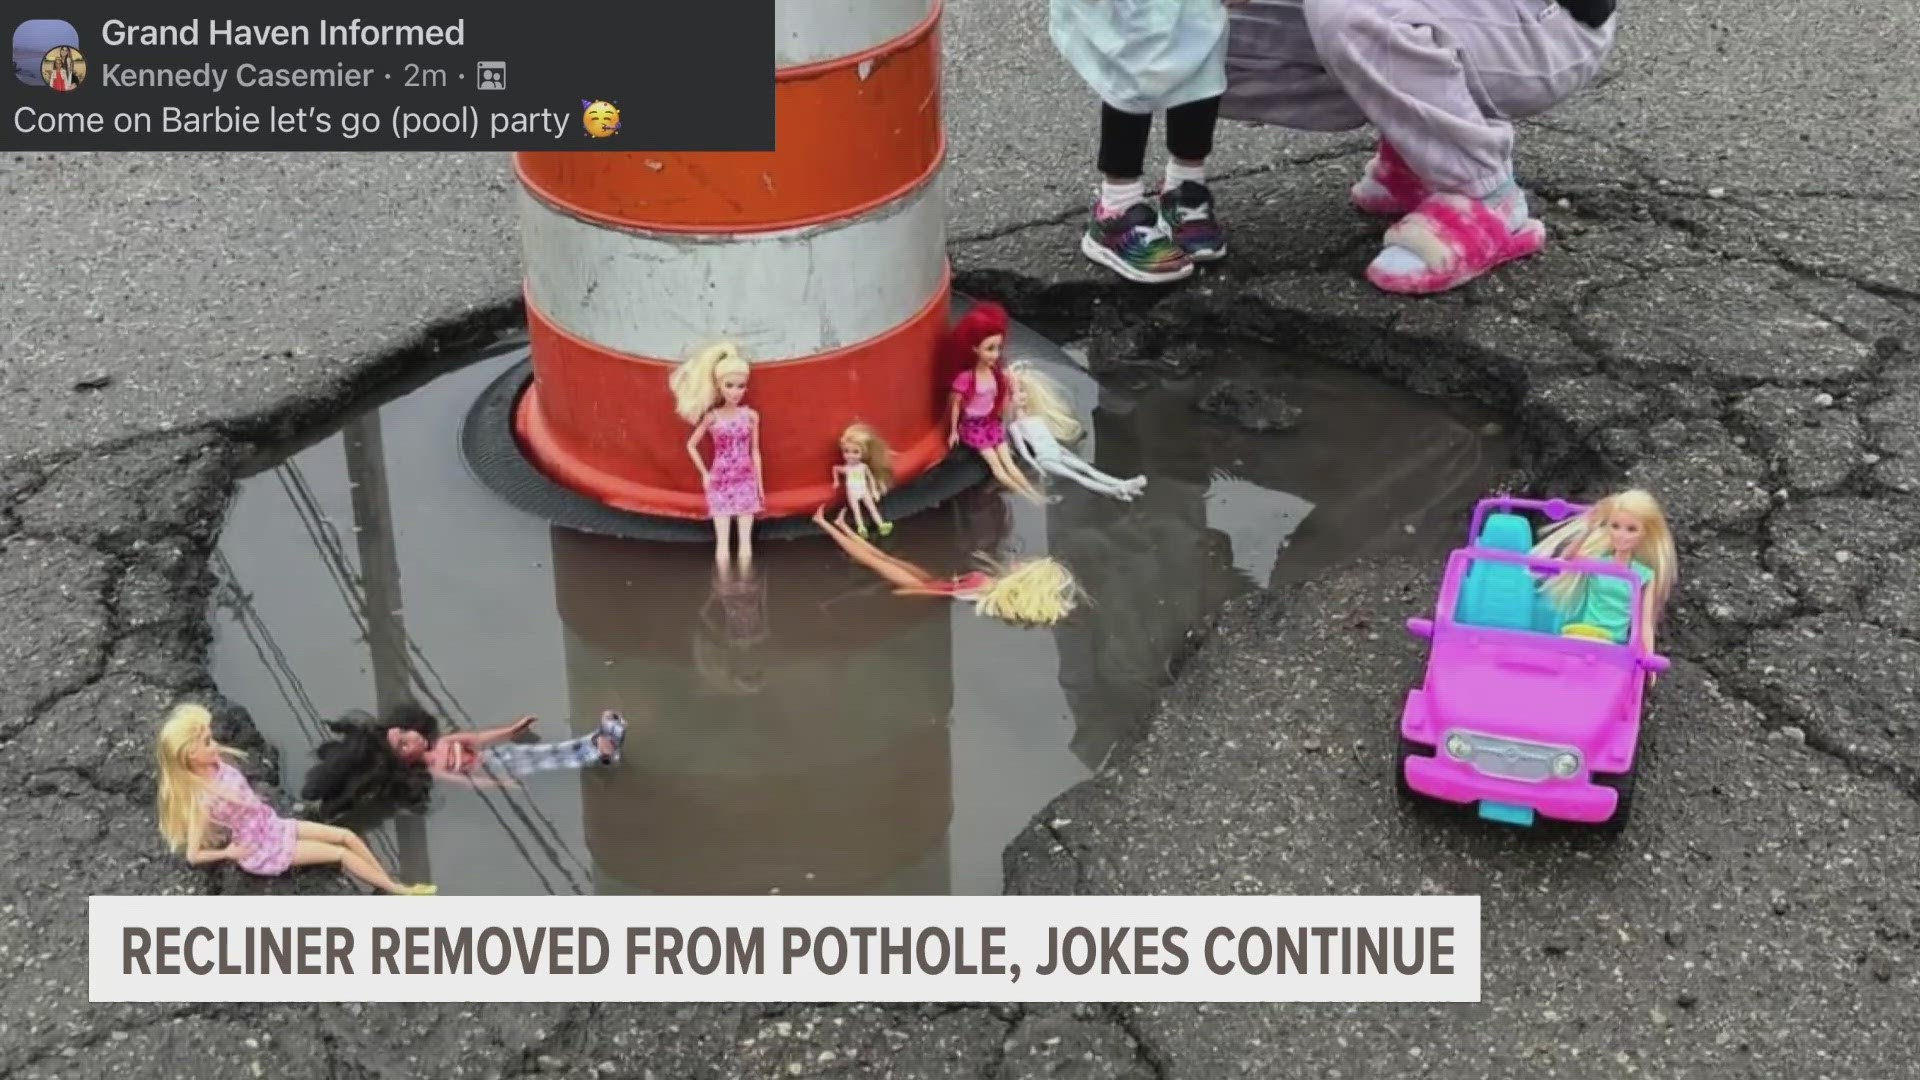 From Barbie parties to fishing in the pothole, the community continues to find the humor in it.